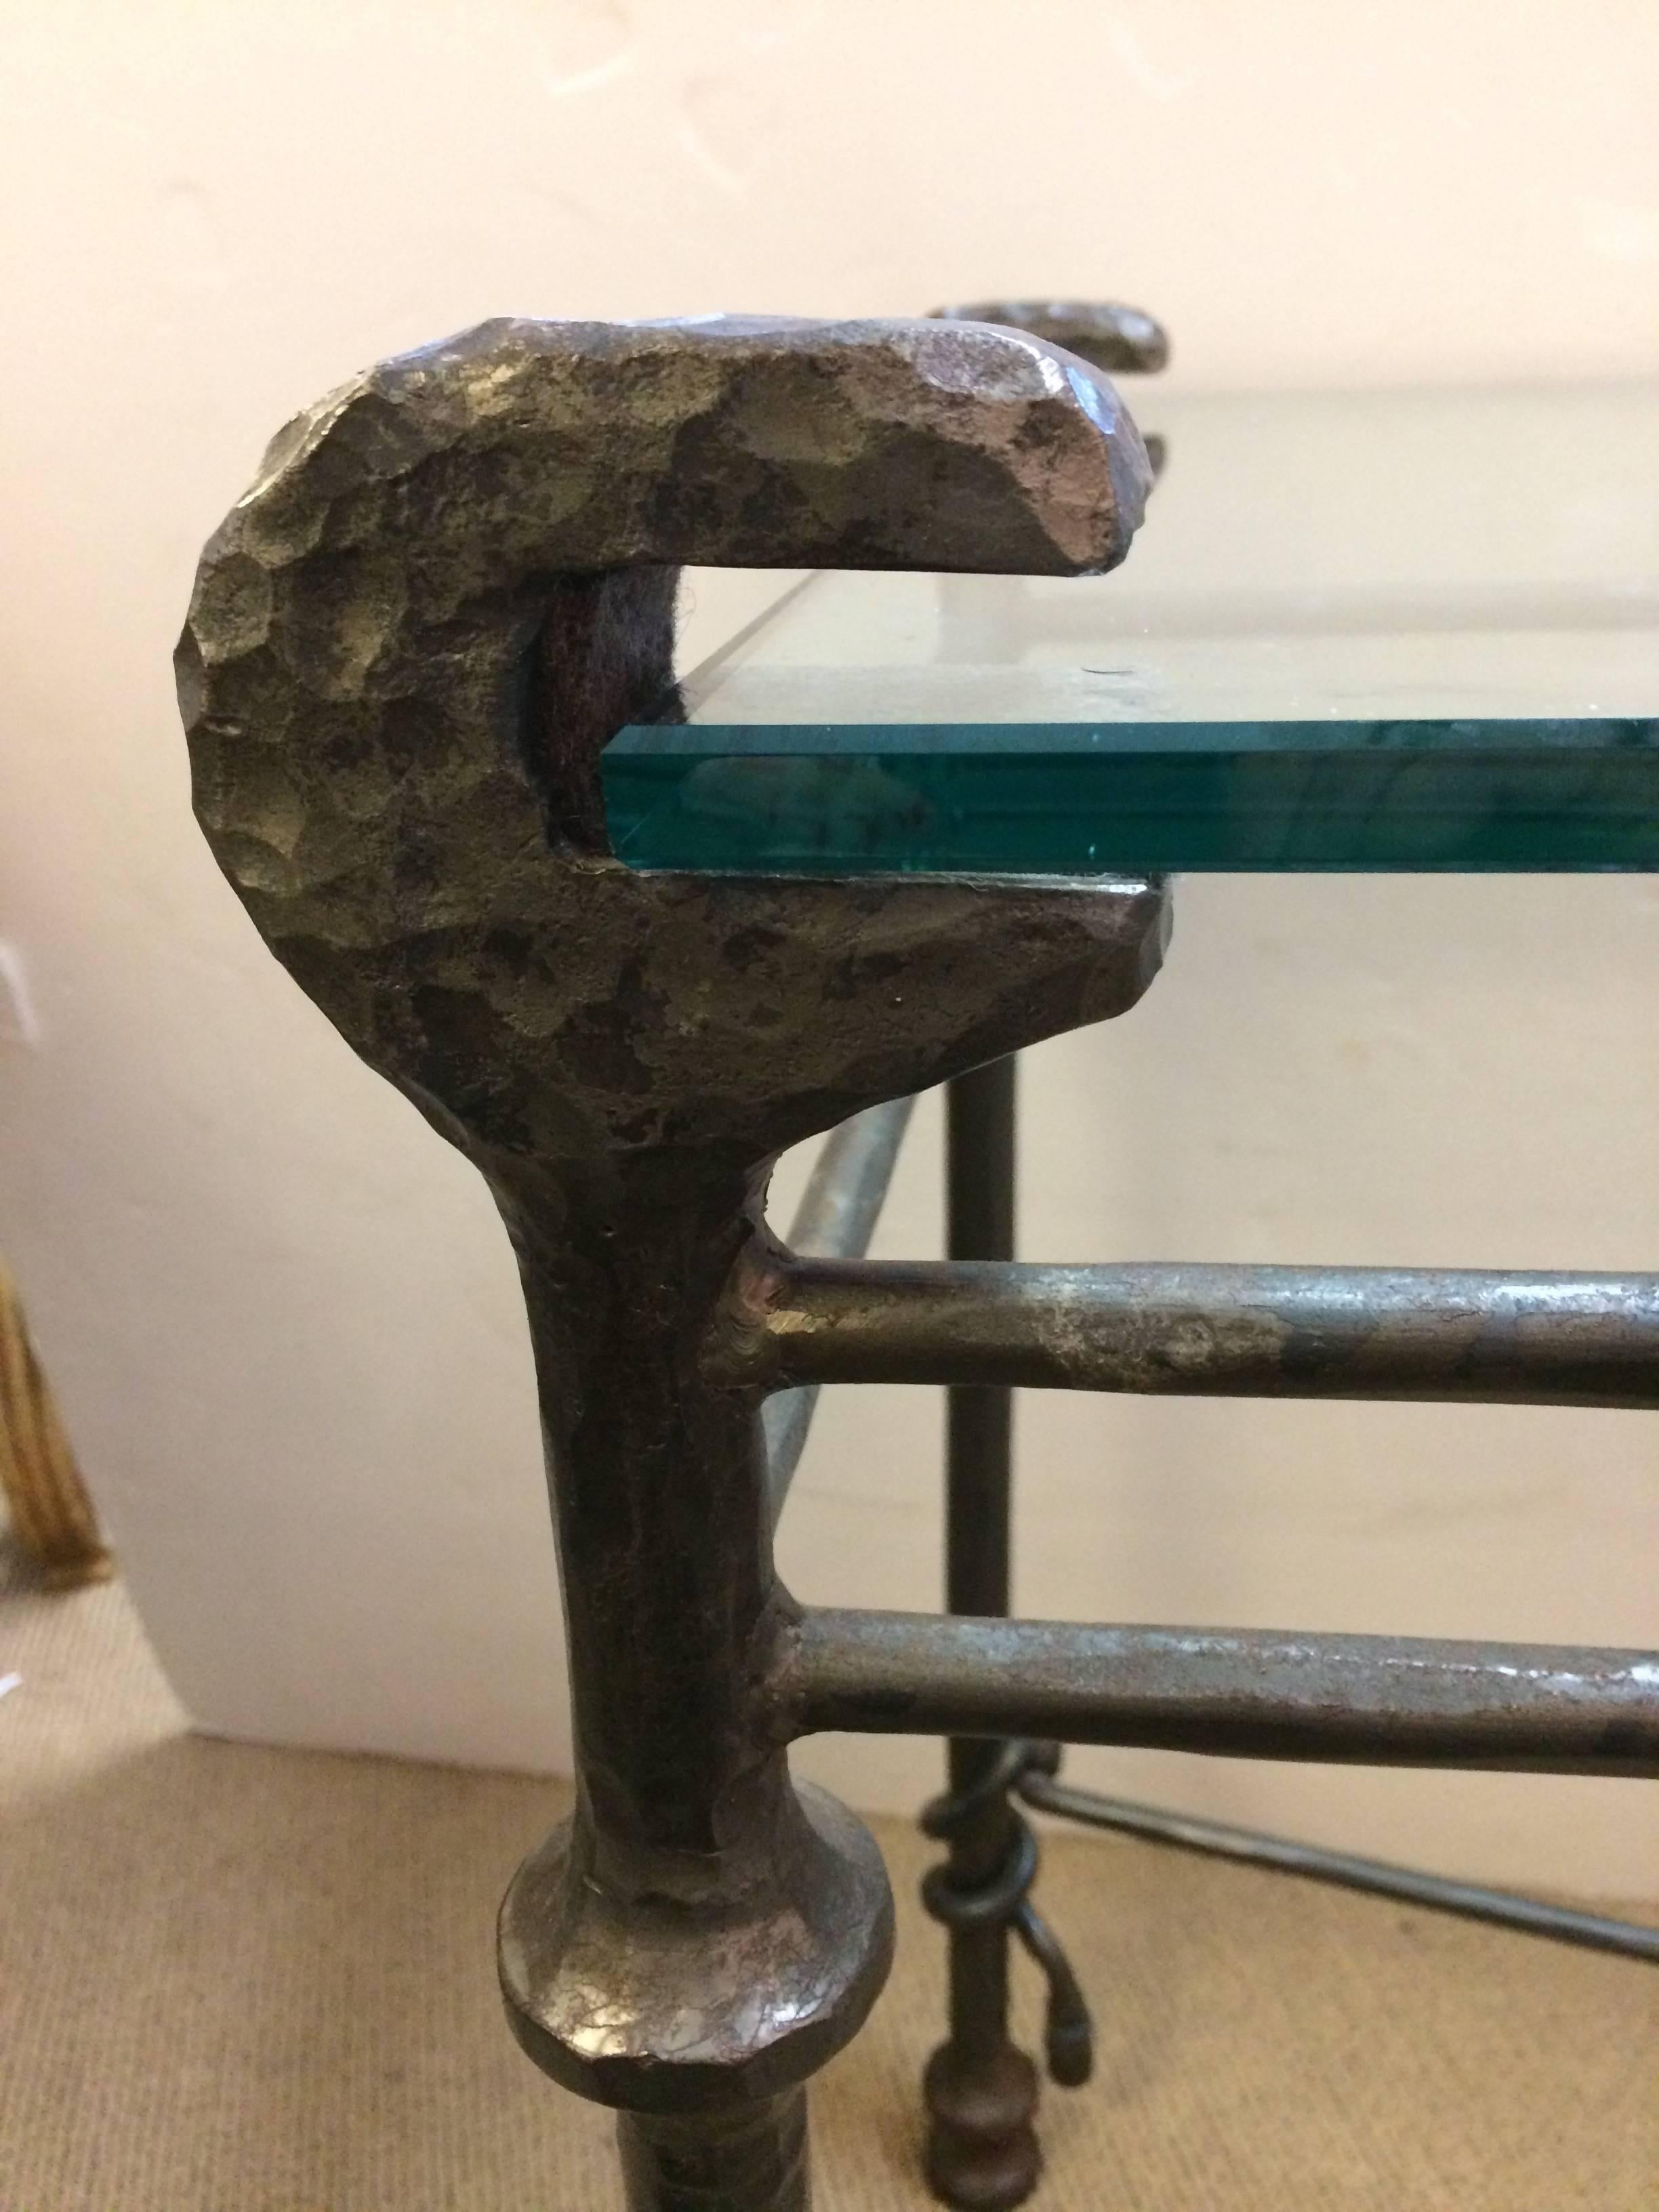 Handsome Italian console table having hand-forged iron base with criss cross and wonderful Giacometti sculptural design as well as a 1/2 inch thick blunt edge piece of rectangular glass. 28 inches to top of glass surface.
NOTE:  Pair of these